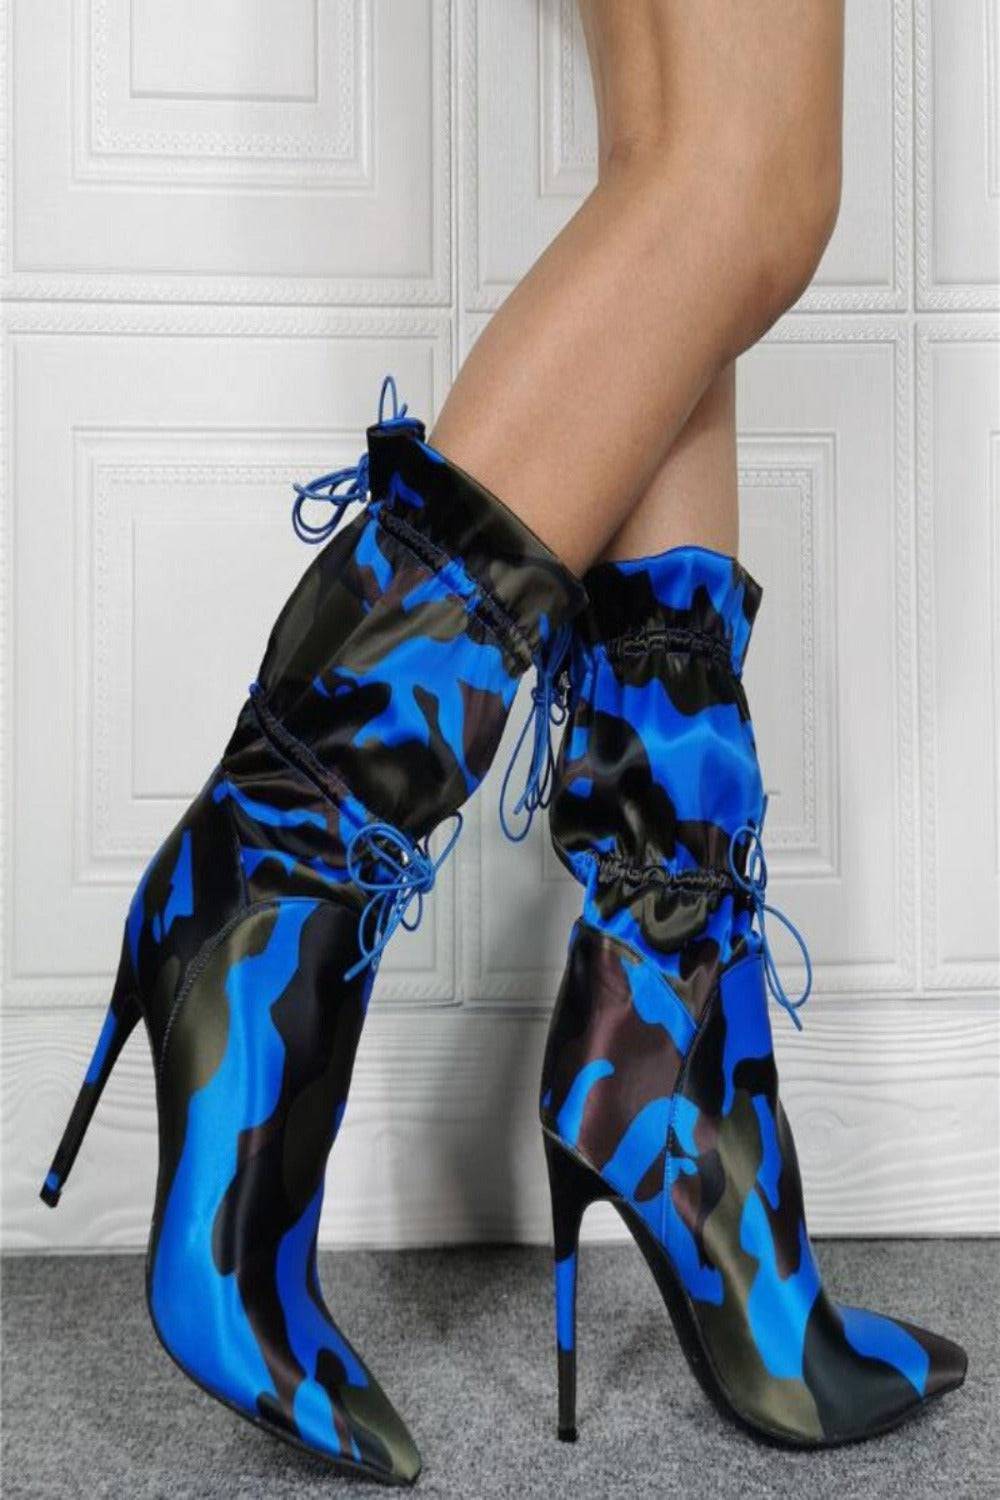 Handmade Camo Lace Up Stiletto High Heel Blue Ankle Boots - TGC Boutique - High Heel Boots